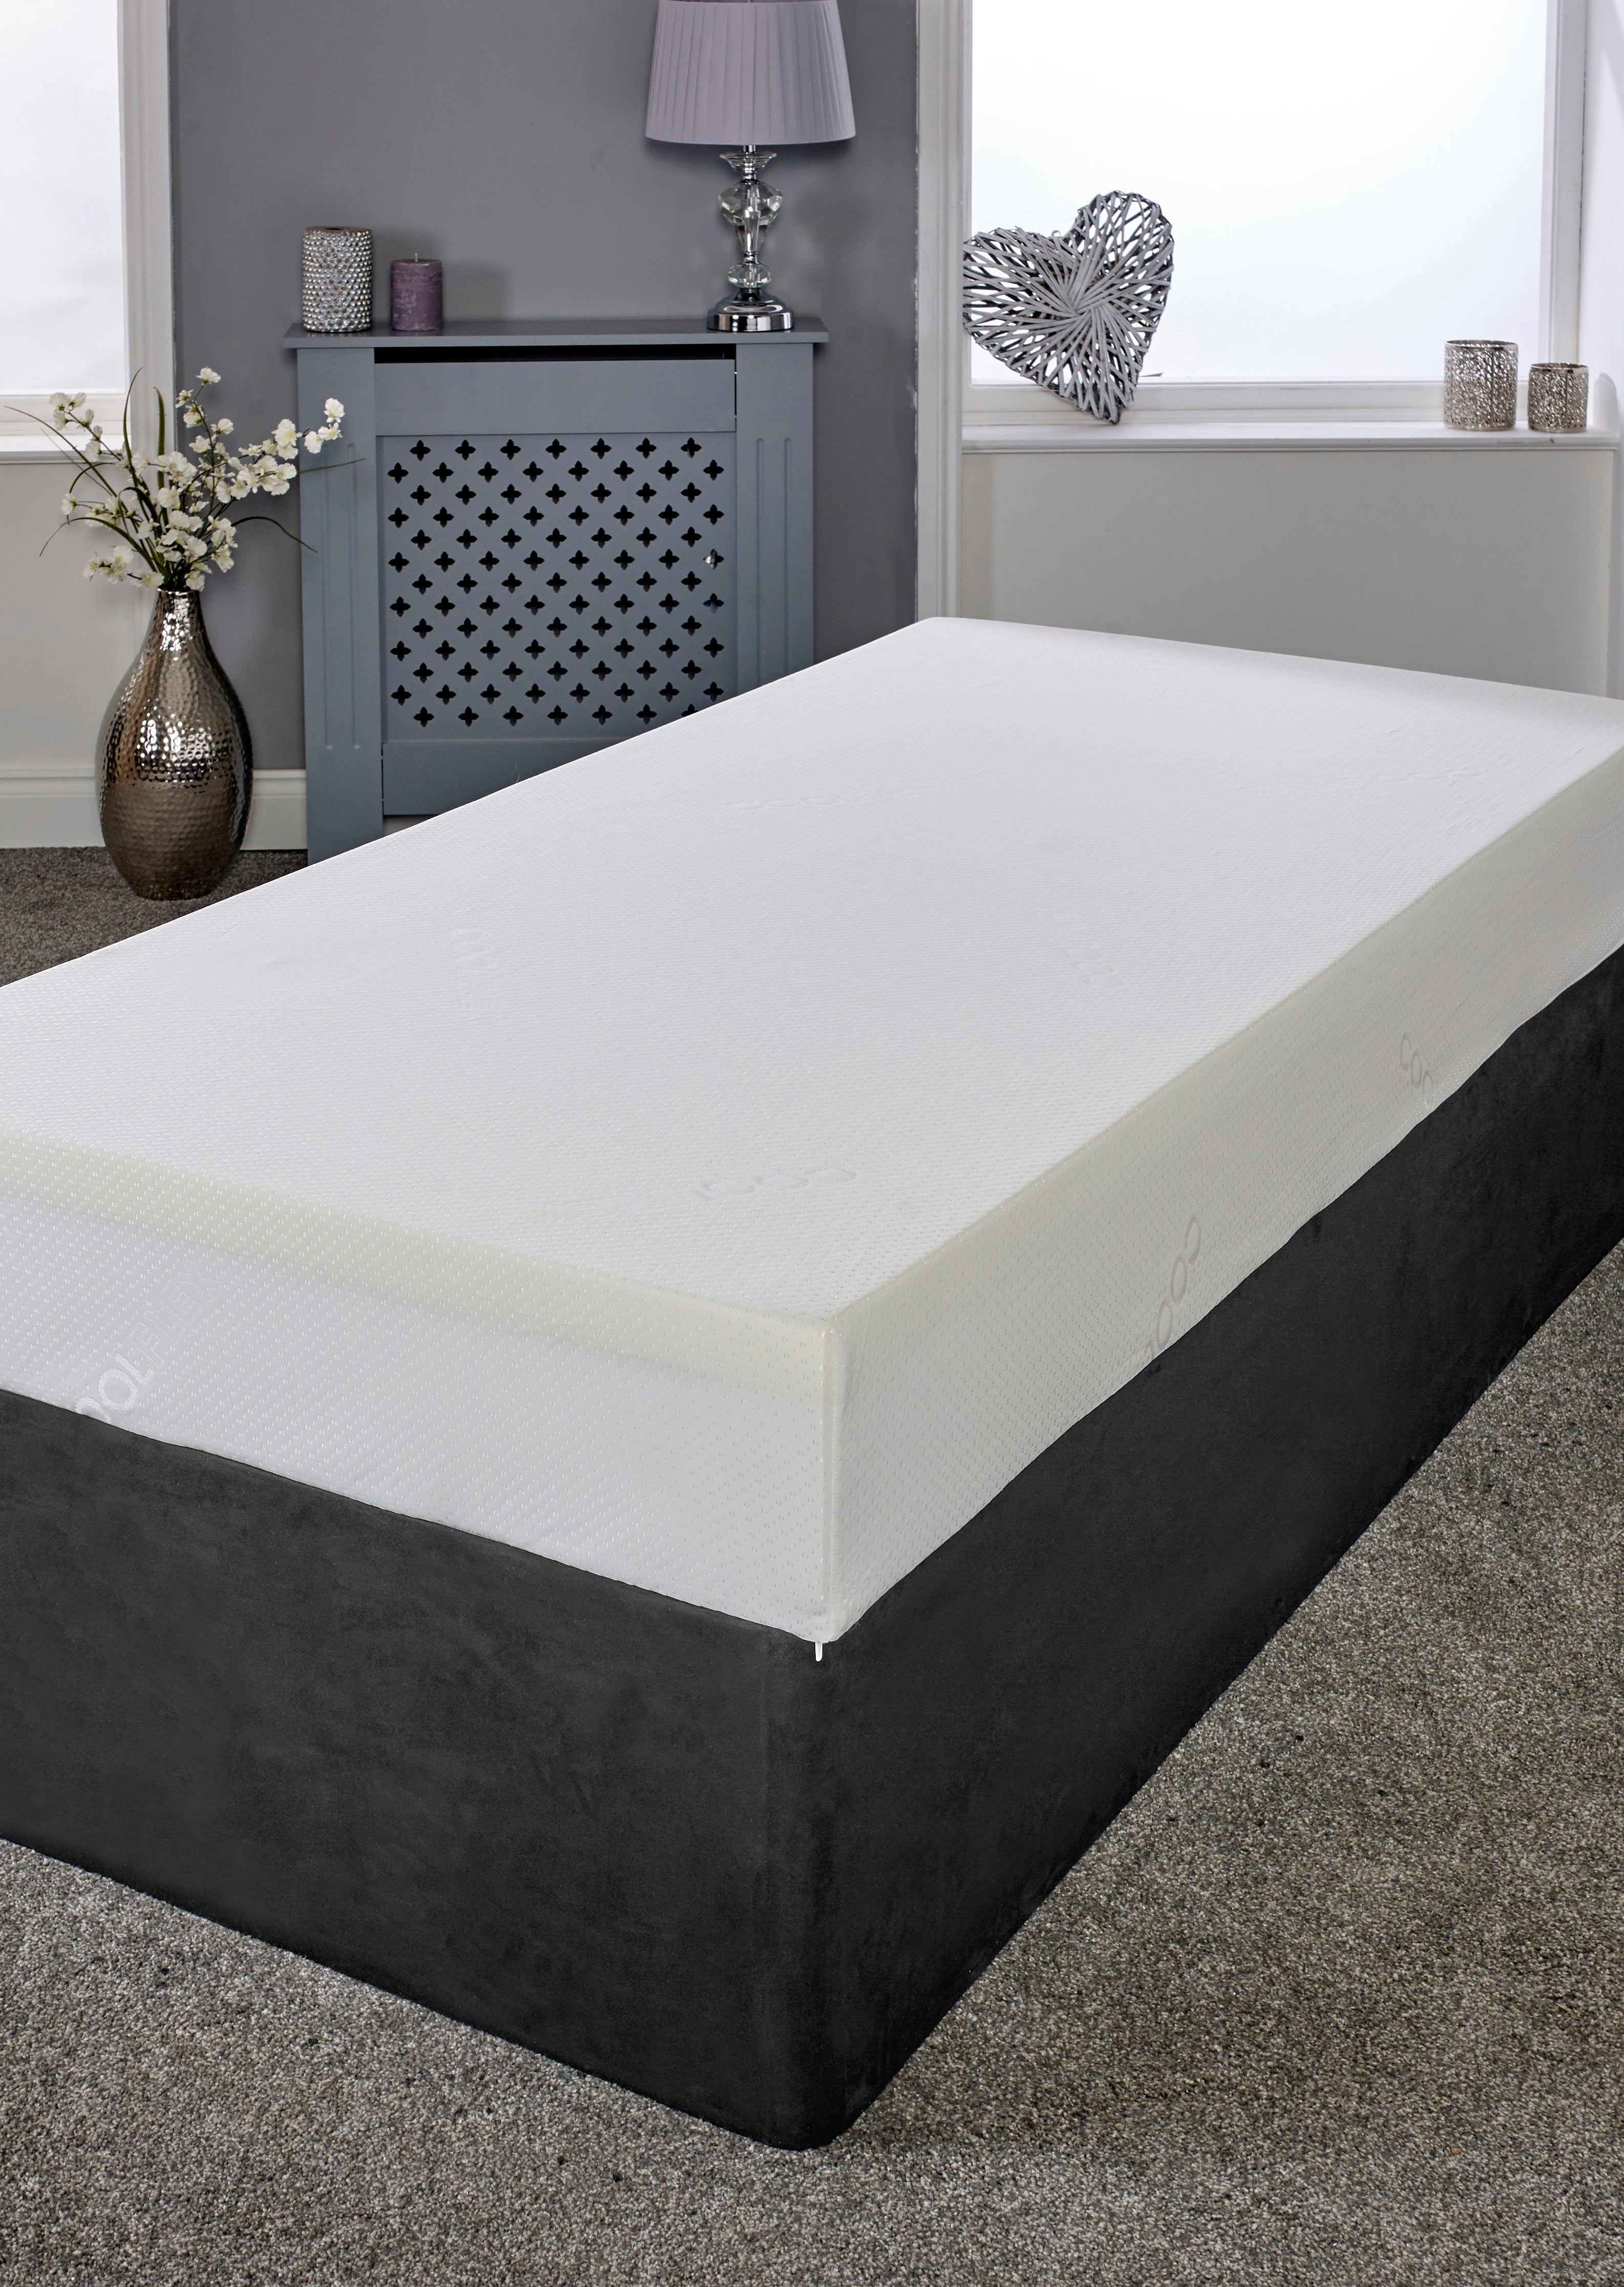 Starlight Beds™ | Orthopaedic All Reflex Foam with Cool Touch Zip Cover Mattress